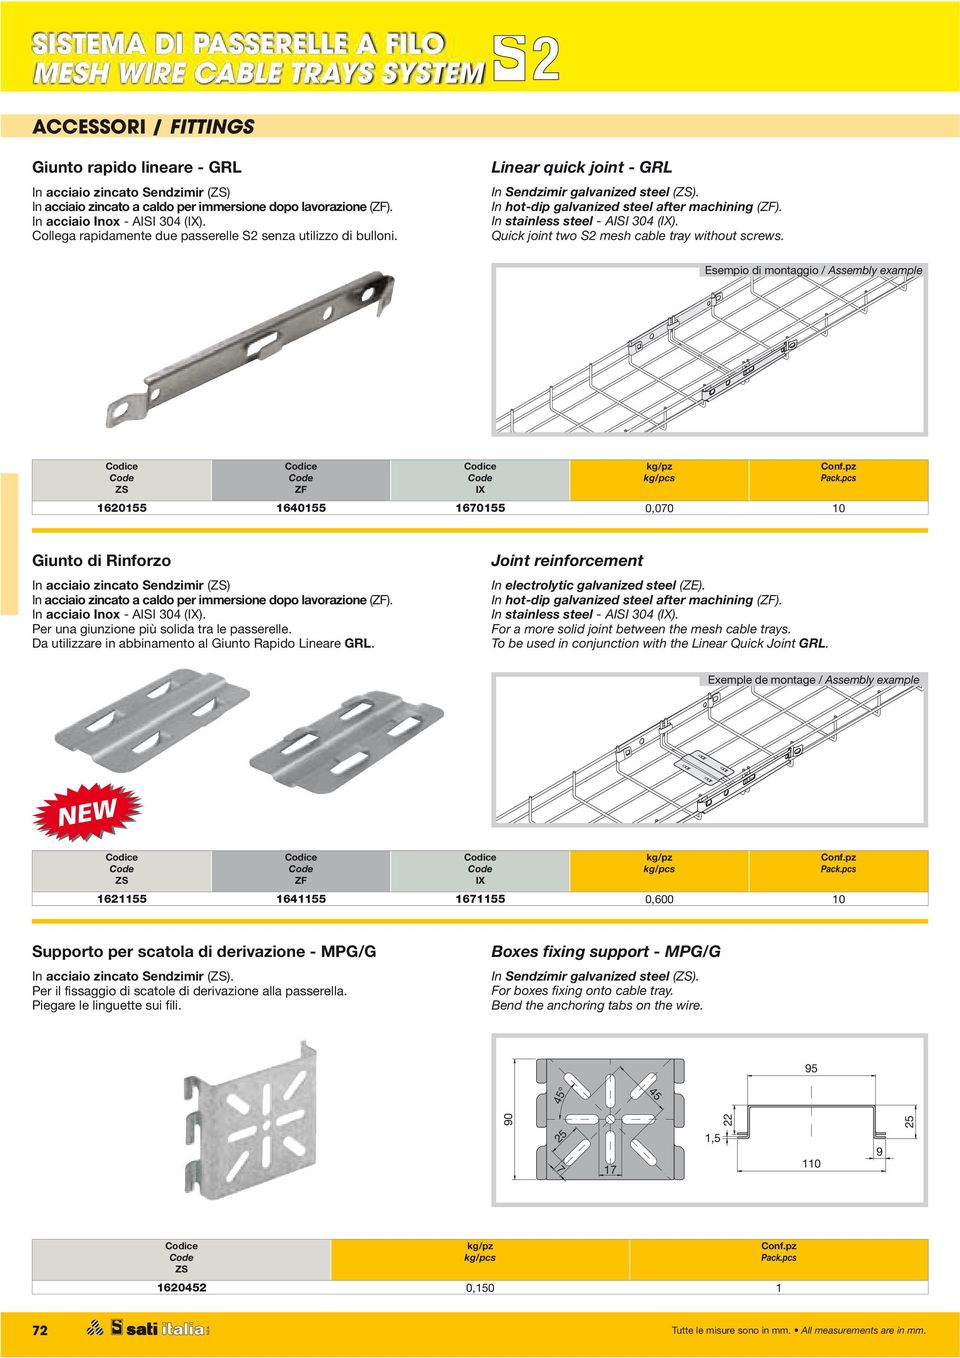 In stainless steel - AISI 304 (). Quick joint two S2 mesh cable tray without screws.